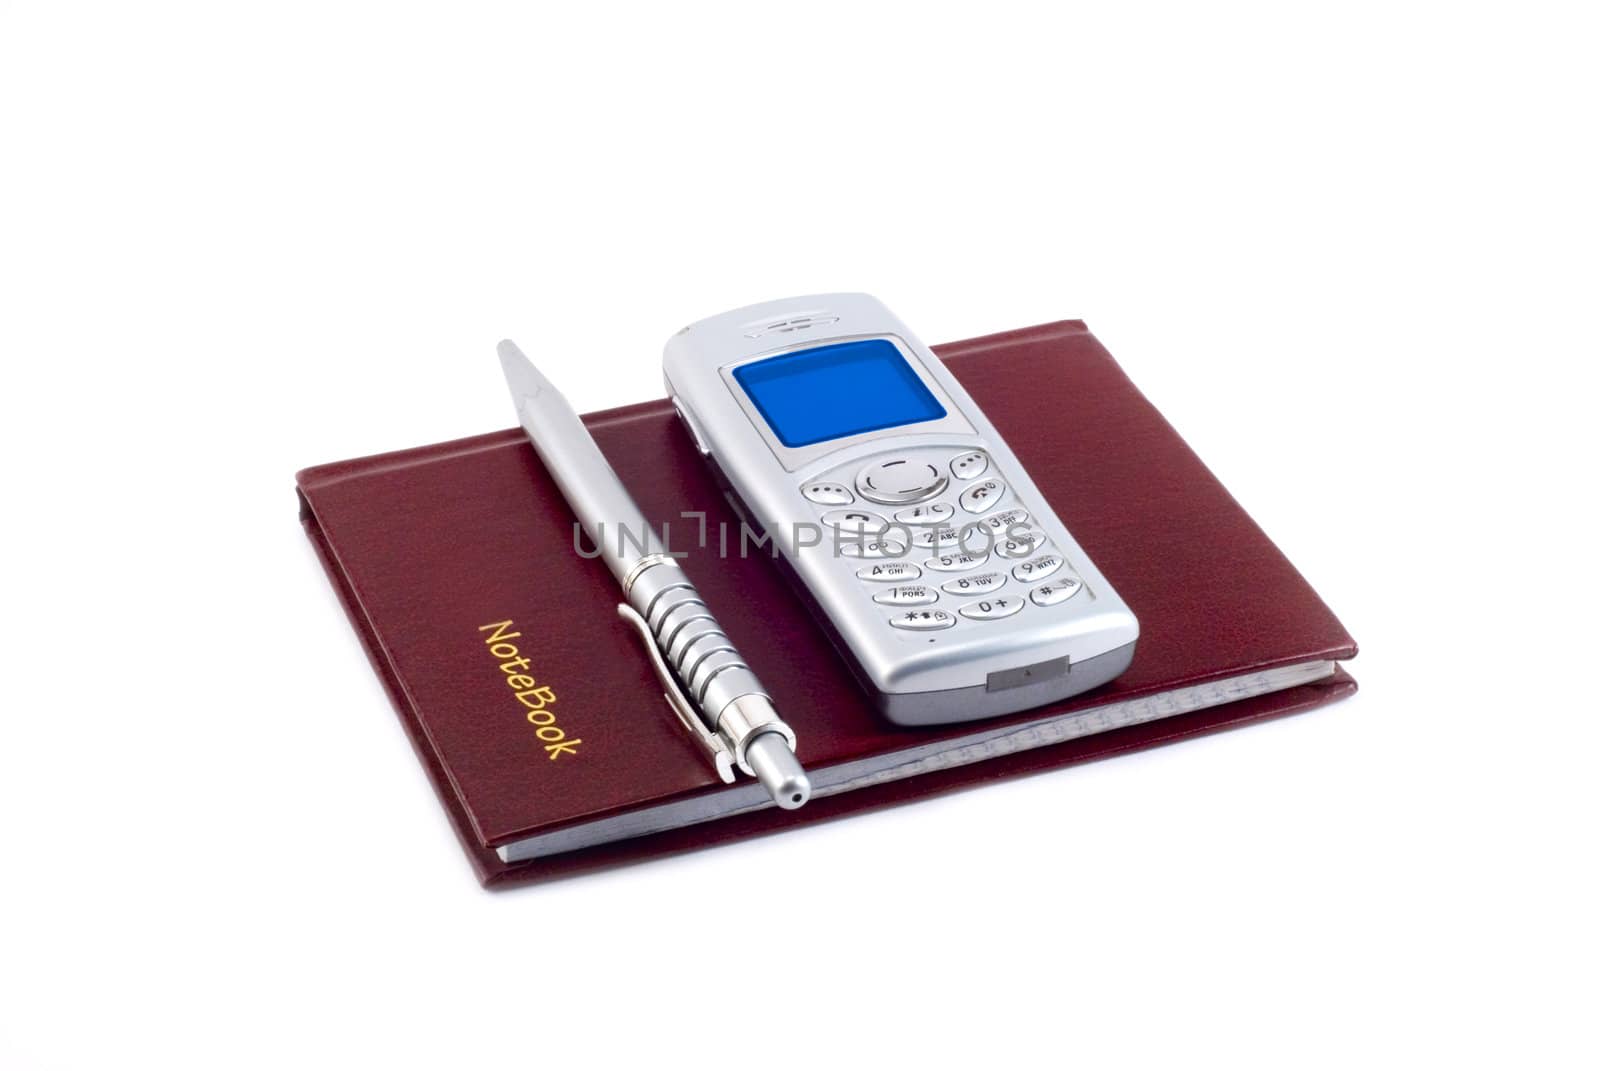 The notebook, the pen and mobile phone are photographed on a white background